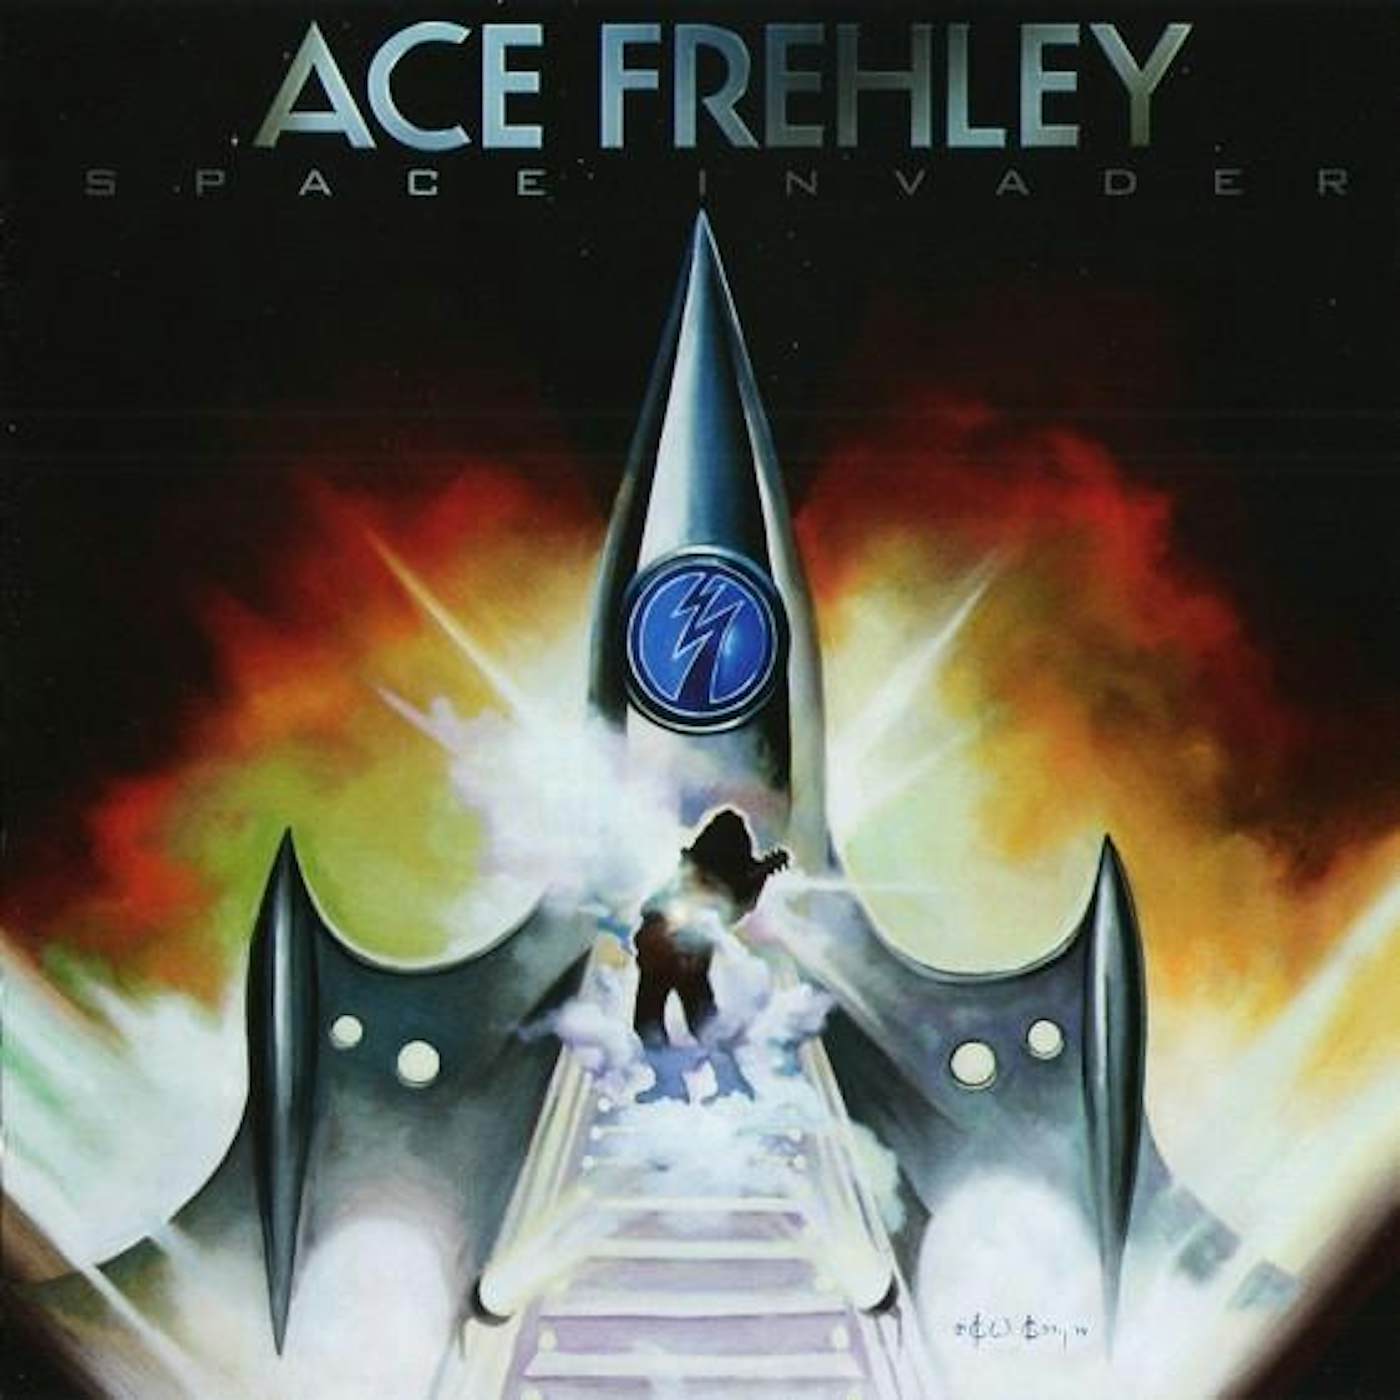 Ace Frehley SPACE INVADER CD